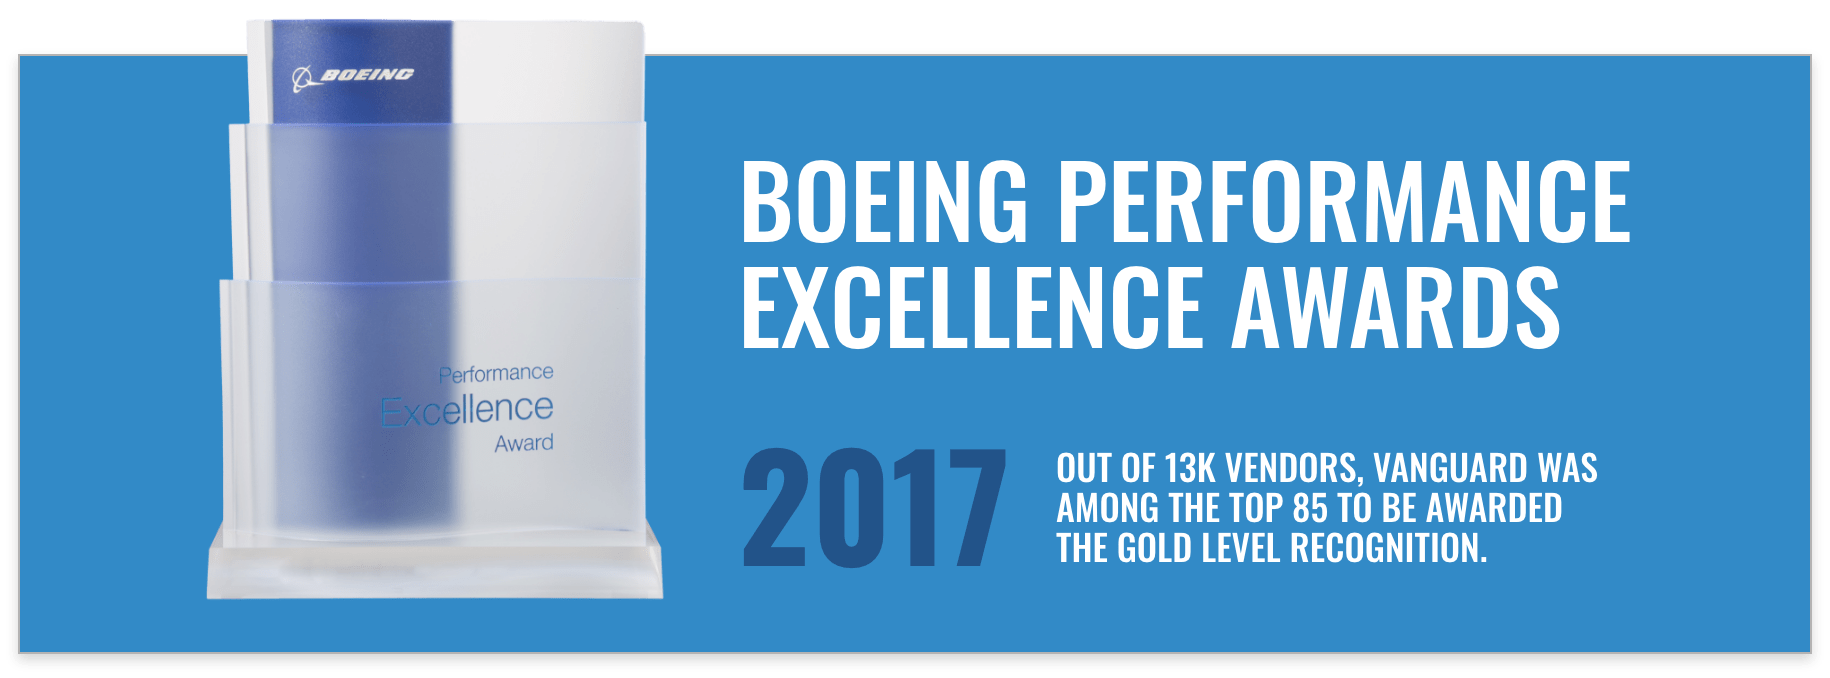 Boeing Performance Excellence Award 2017